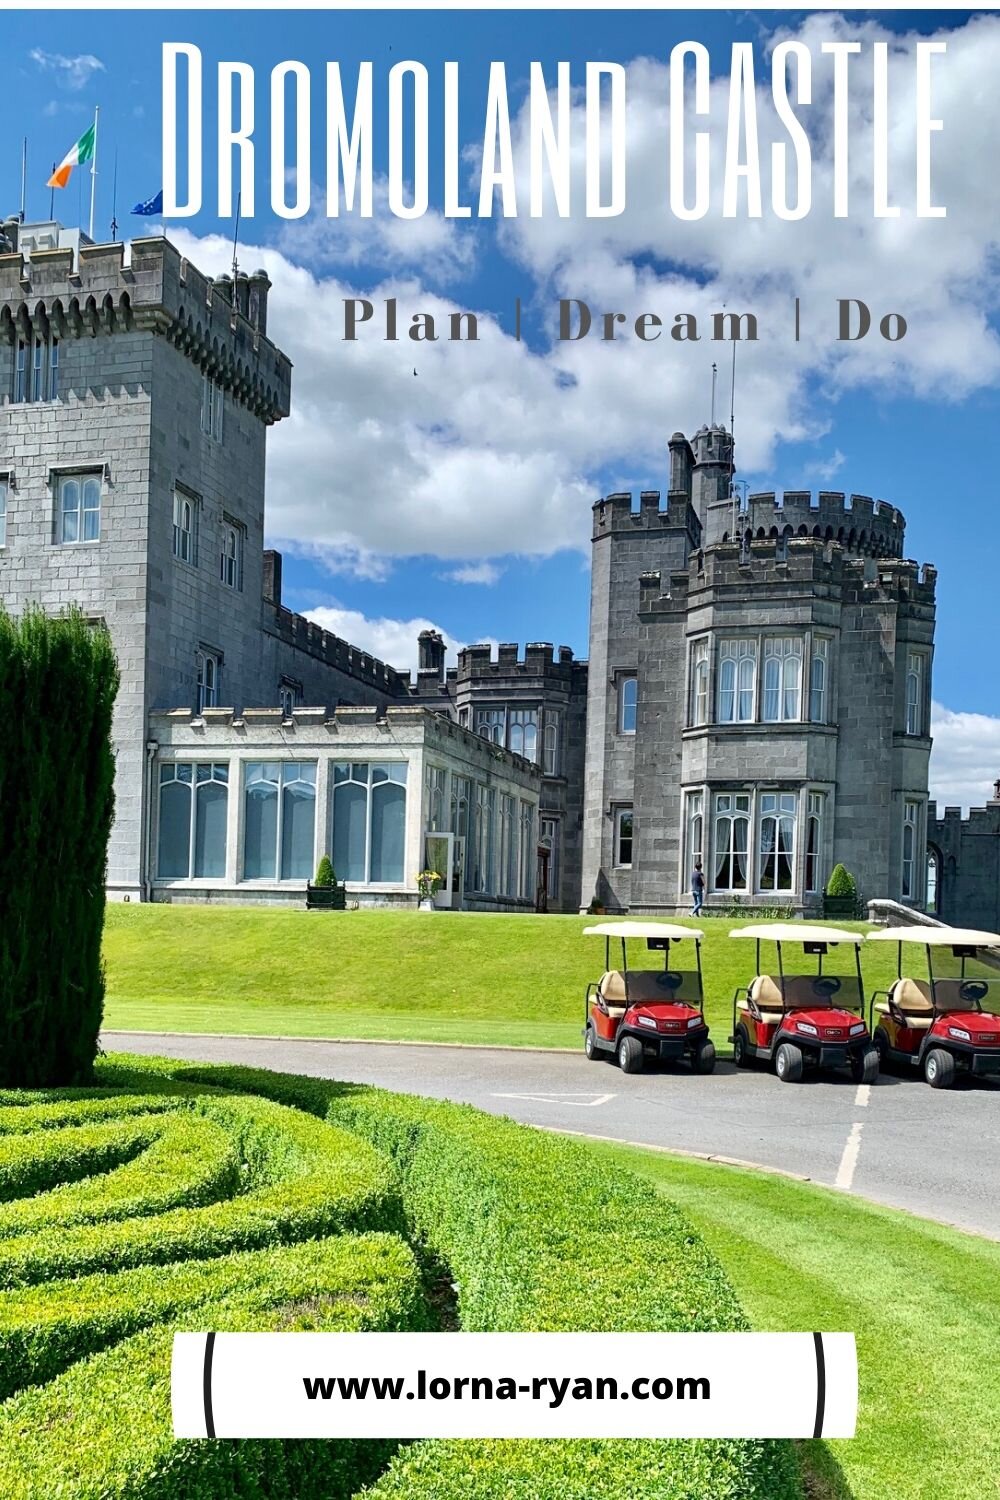 Dromoland Castle Hotel & Country Estate Newmarket on Fergus, Co. Clare, Ireland ratings, photos, prices, expert advice, dromoland castle spa review and tips, and more information. A must see castle in the west of Ireland #irishcastle #irishspa #cast…